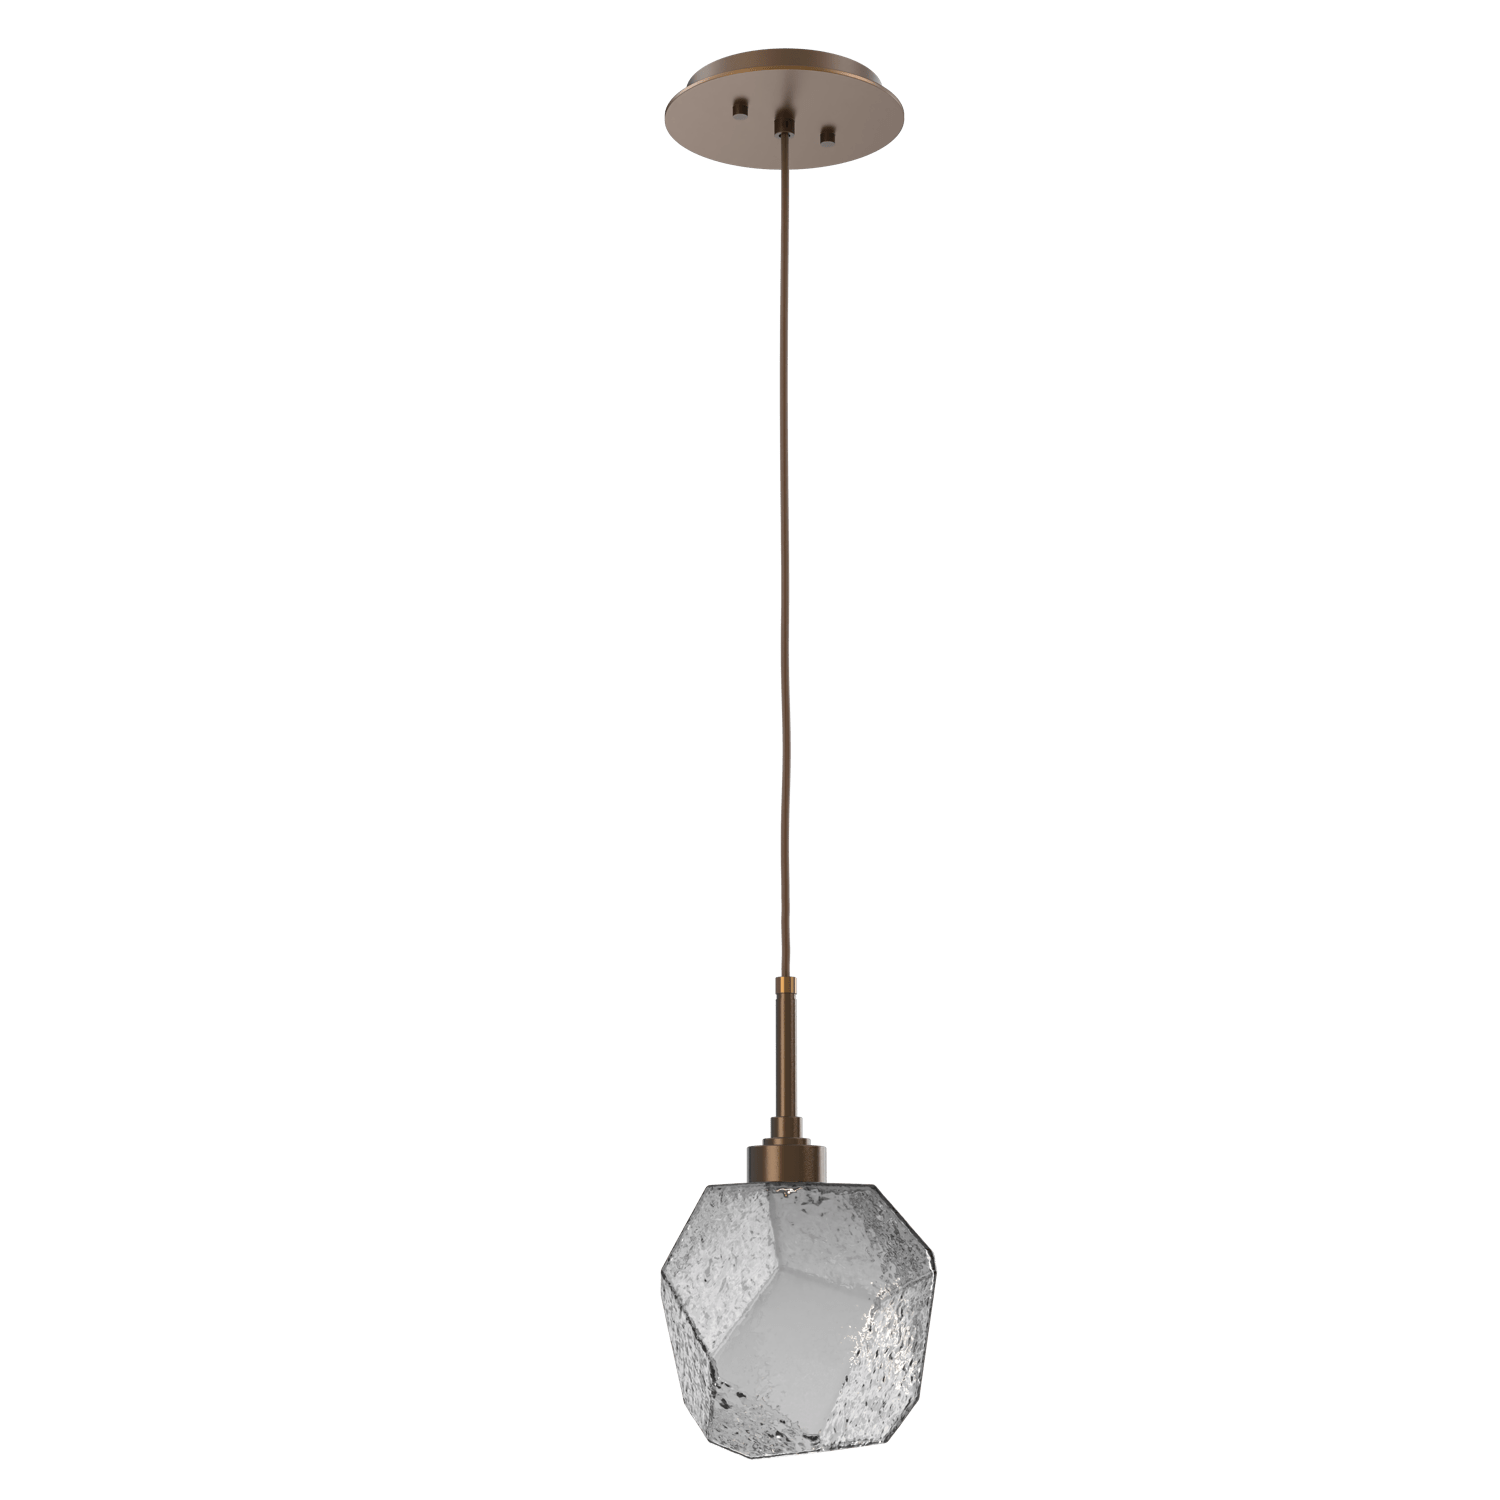 LAB0039-01-FB-S-Hammerton-Studio-Gem-pendant-light-with-flat-bronze-finish-and-smoke-blown-glass-shades-and-LED-lamping